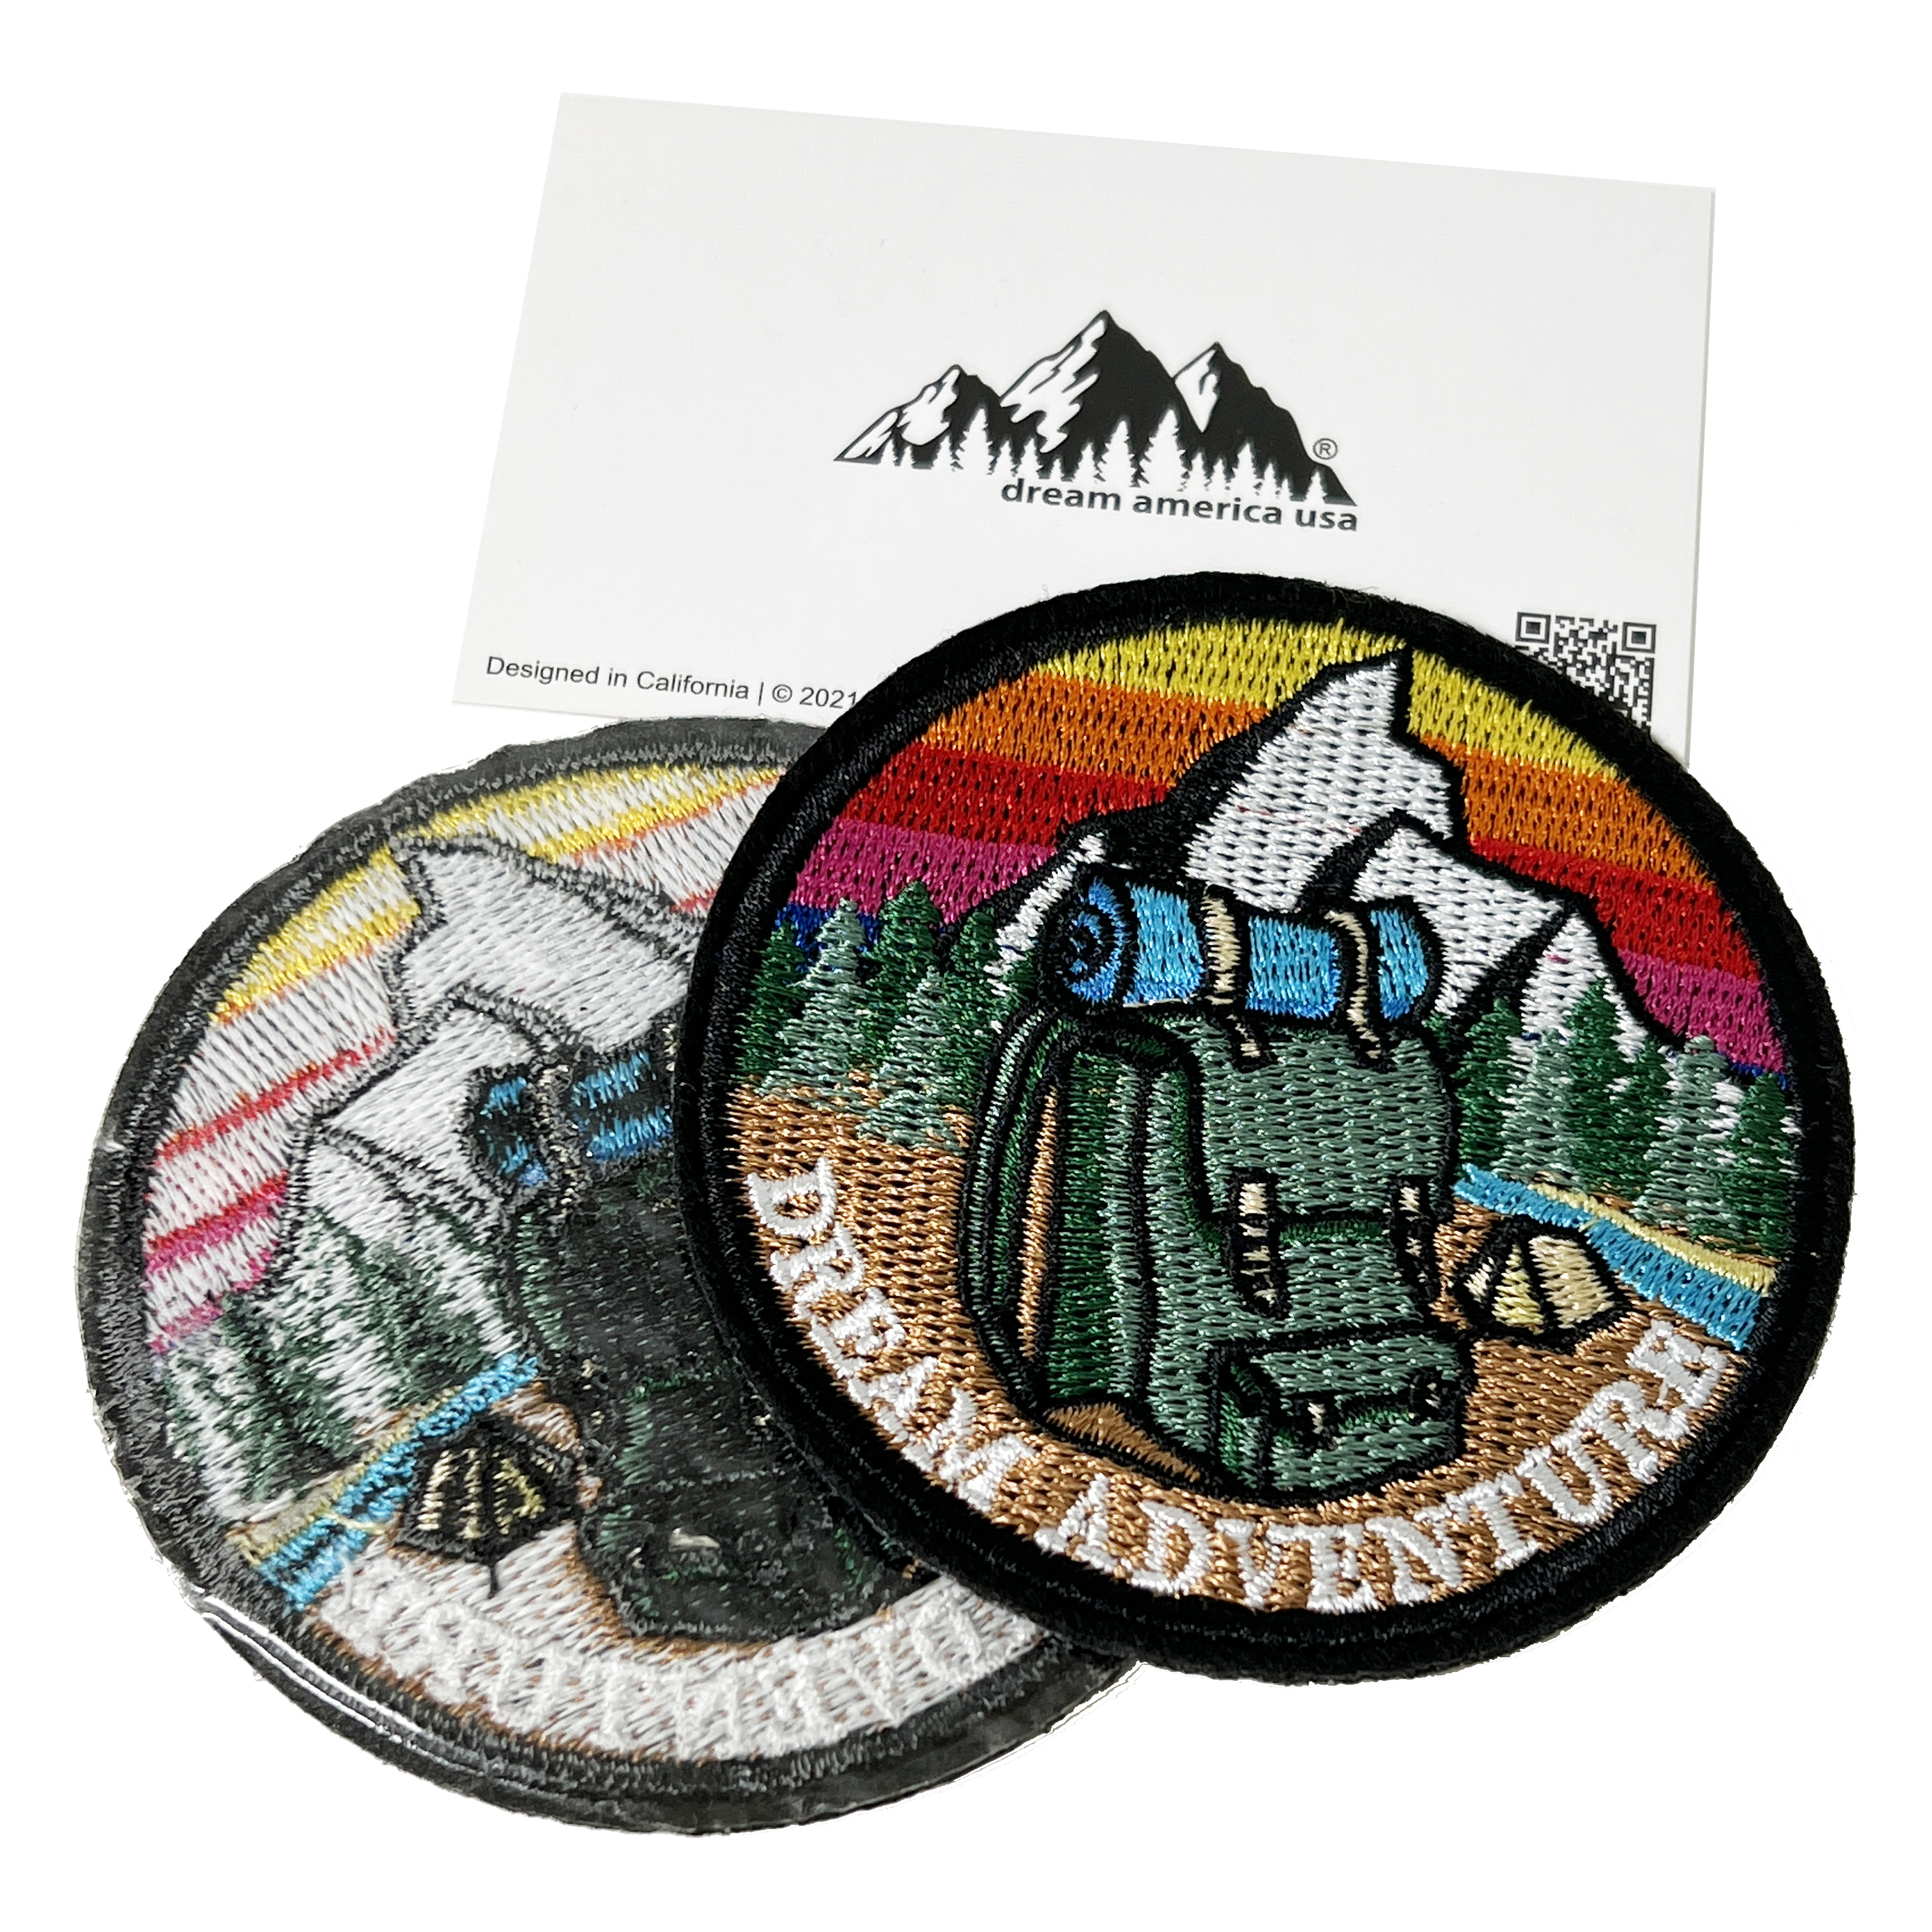 Pick One Iron on Patches Outdoors Adventure Space Cat Patch Desert Mountain  Peachy Vintage Retro Hat Backpack Jacket Patch Espi Lane 